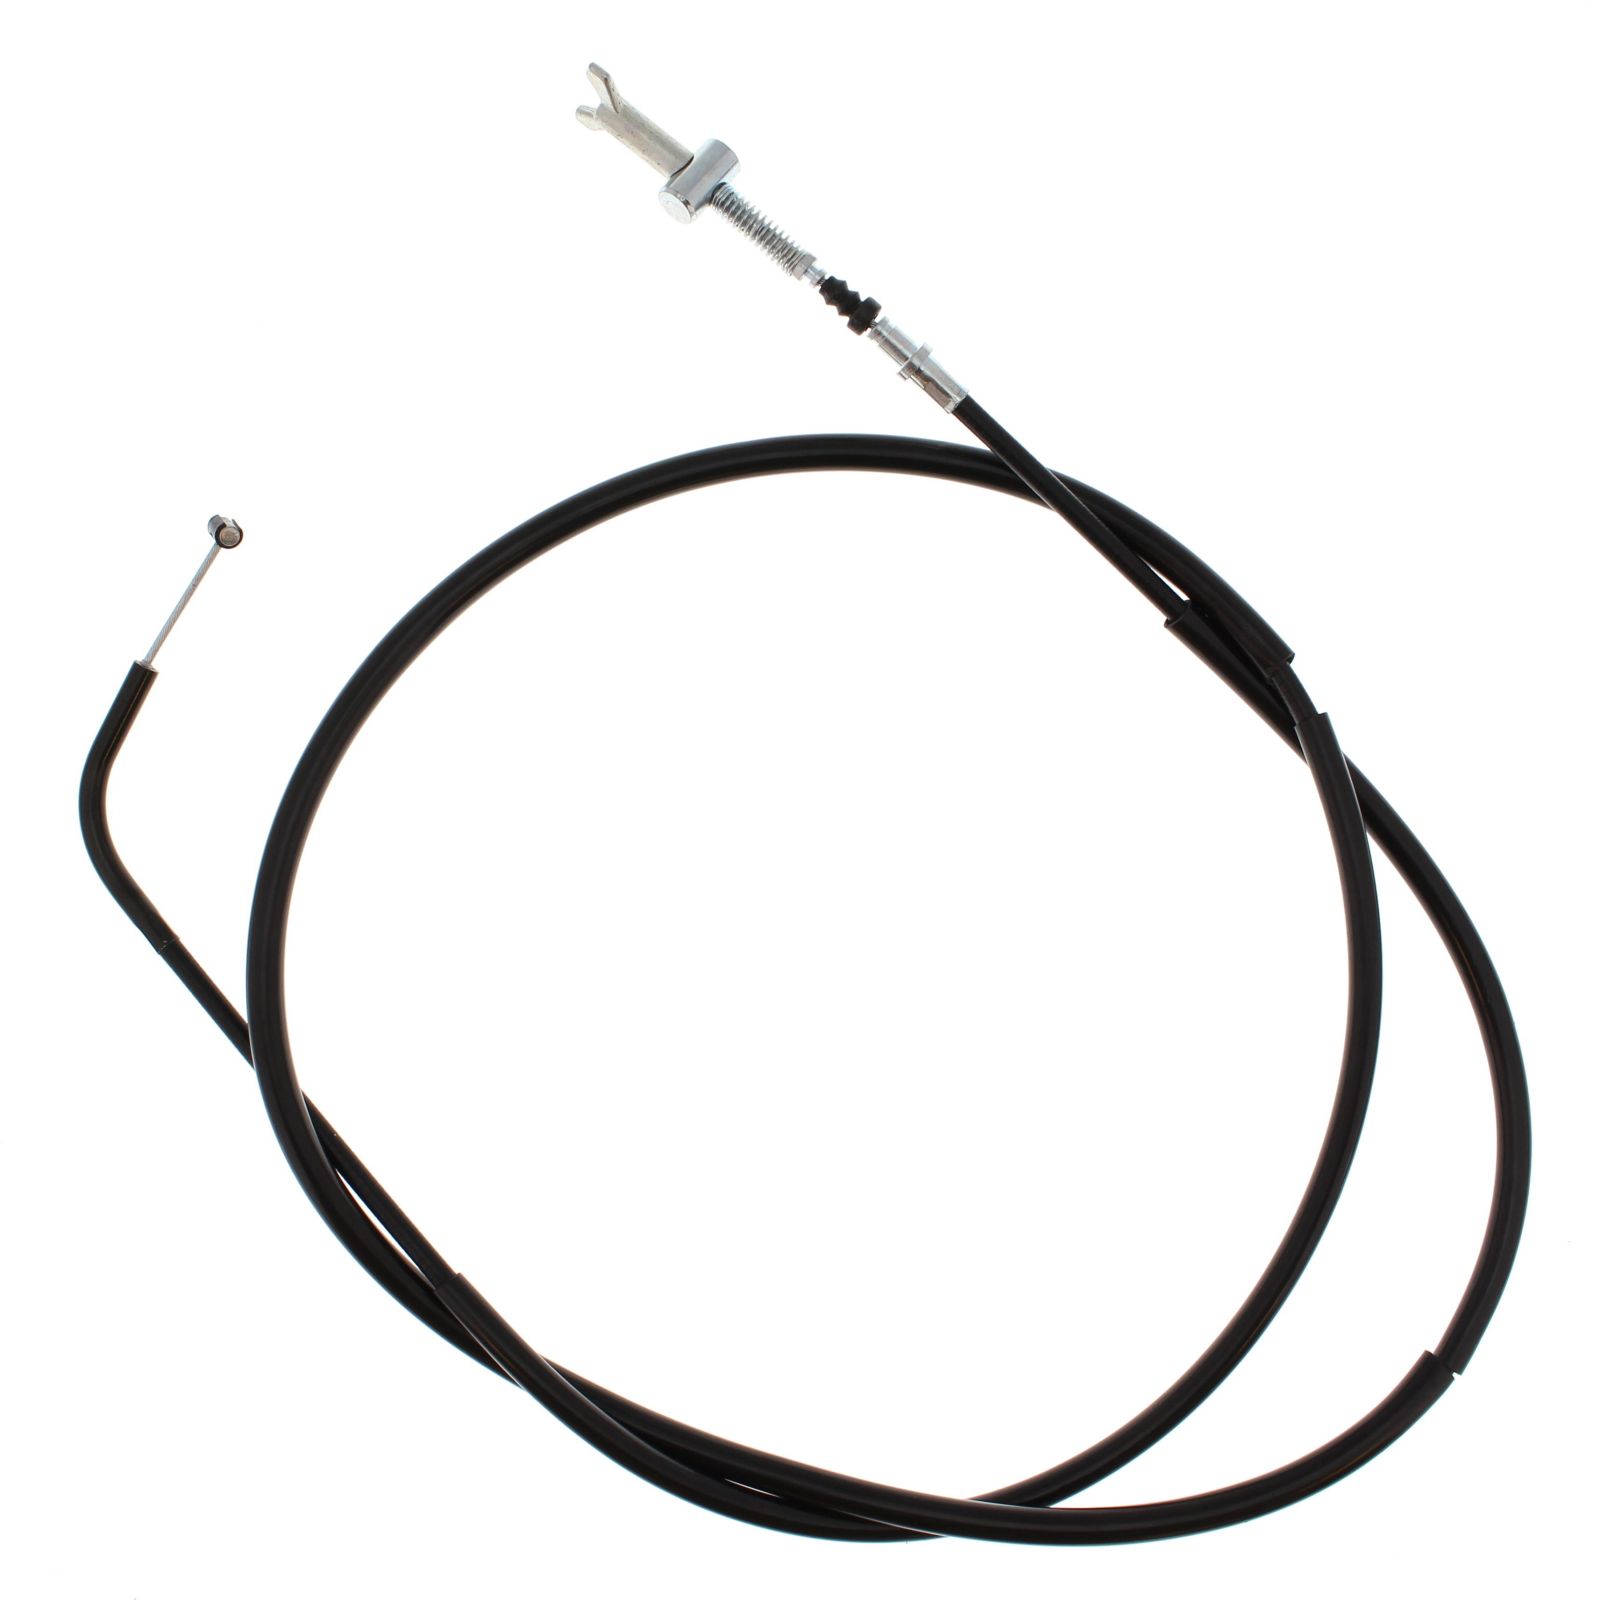 Wrp Brake Cables - WRP454062 image